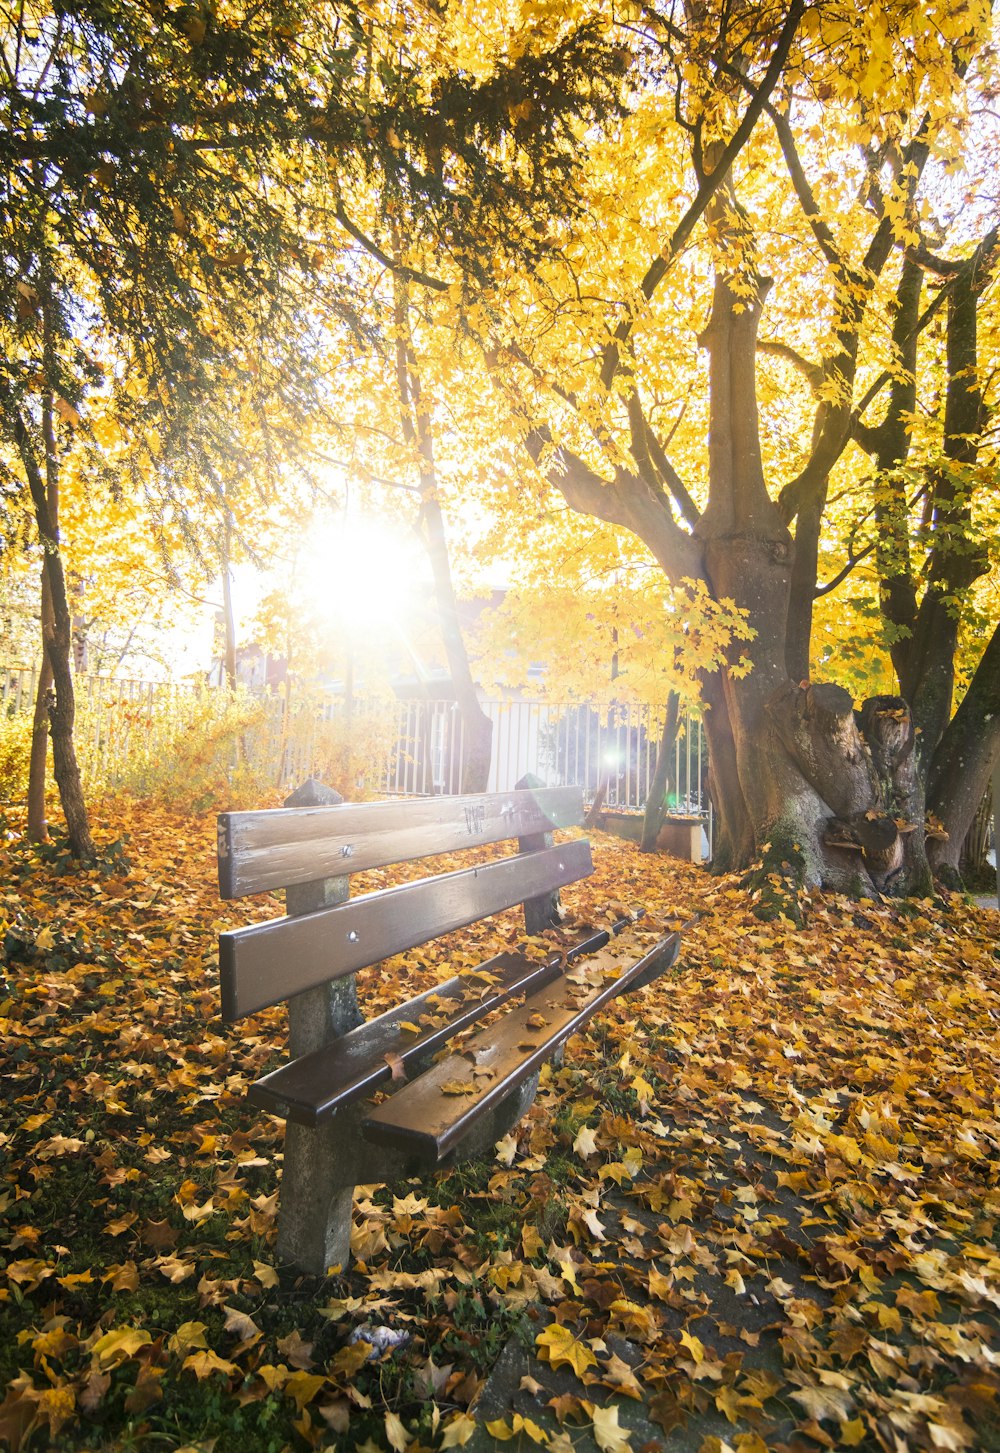 a park bench sitting in the middle of a leaf covered park